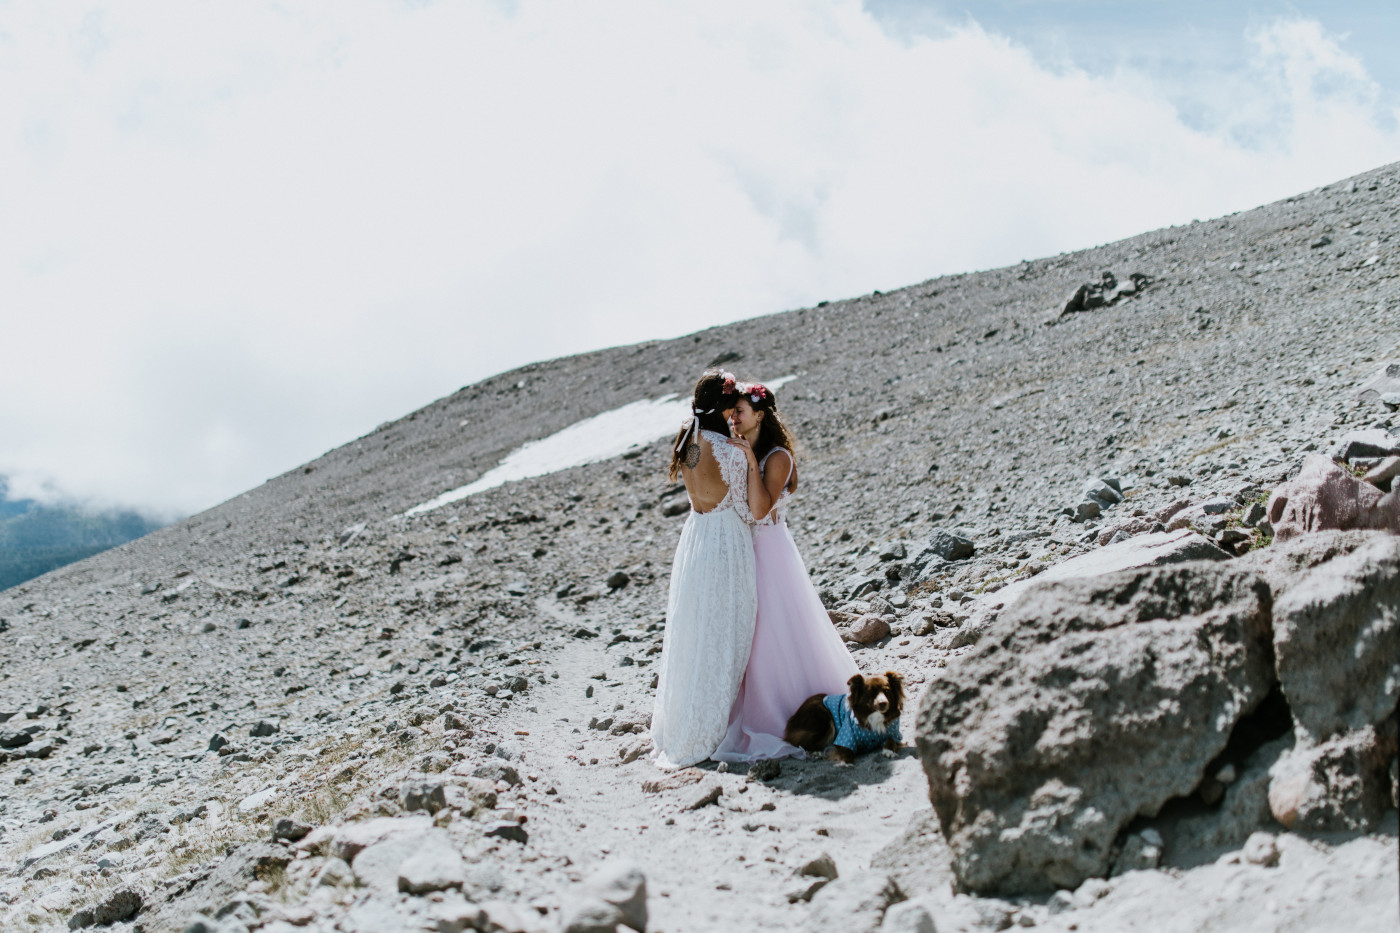 Margaux and Heather share a first dance on Mount Hood. Elopement photography at Mount Hood by Sienna Plus Josh.